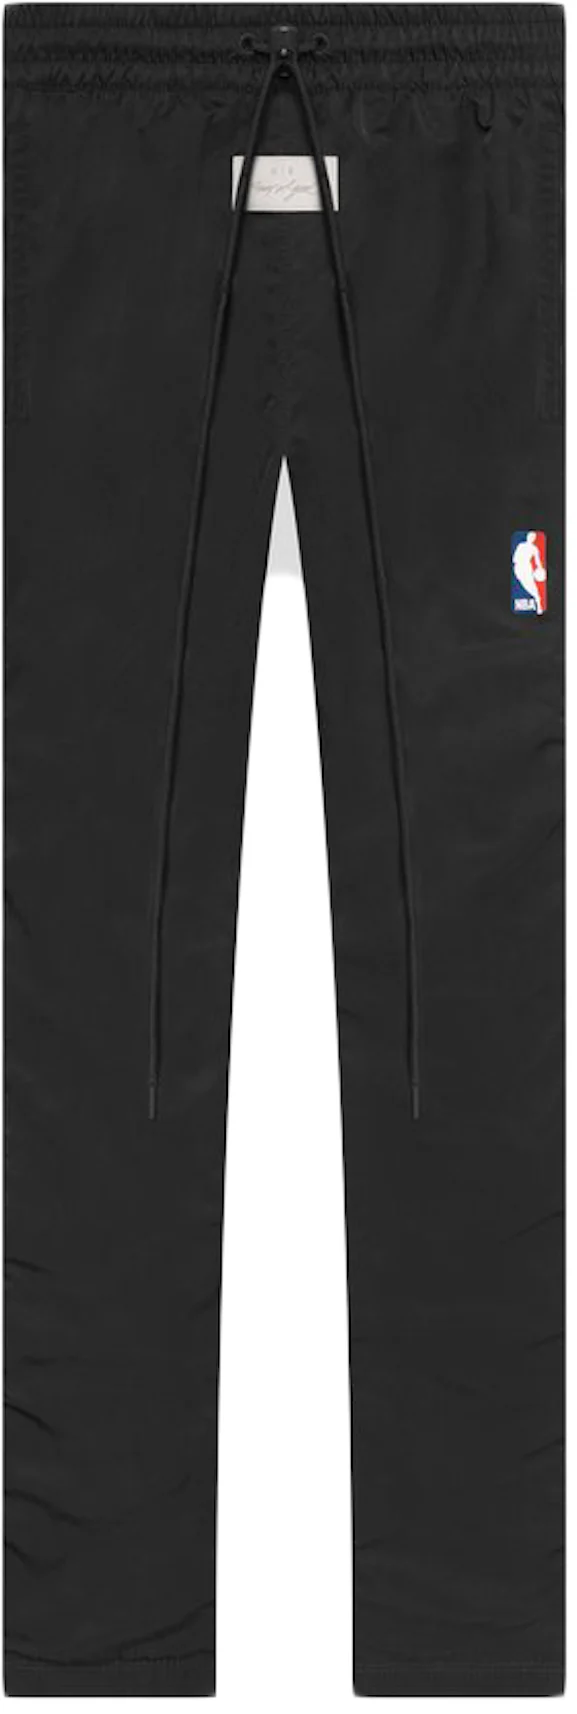 Nike x Fear of God x NBA Crossover Side Solid Color Sports Pants Gray  CU4684-271